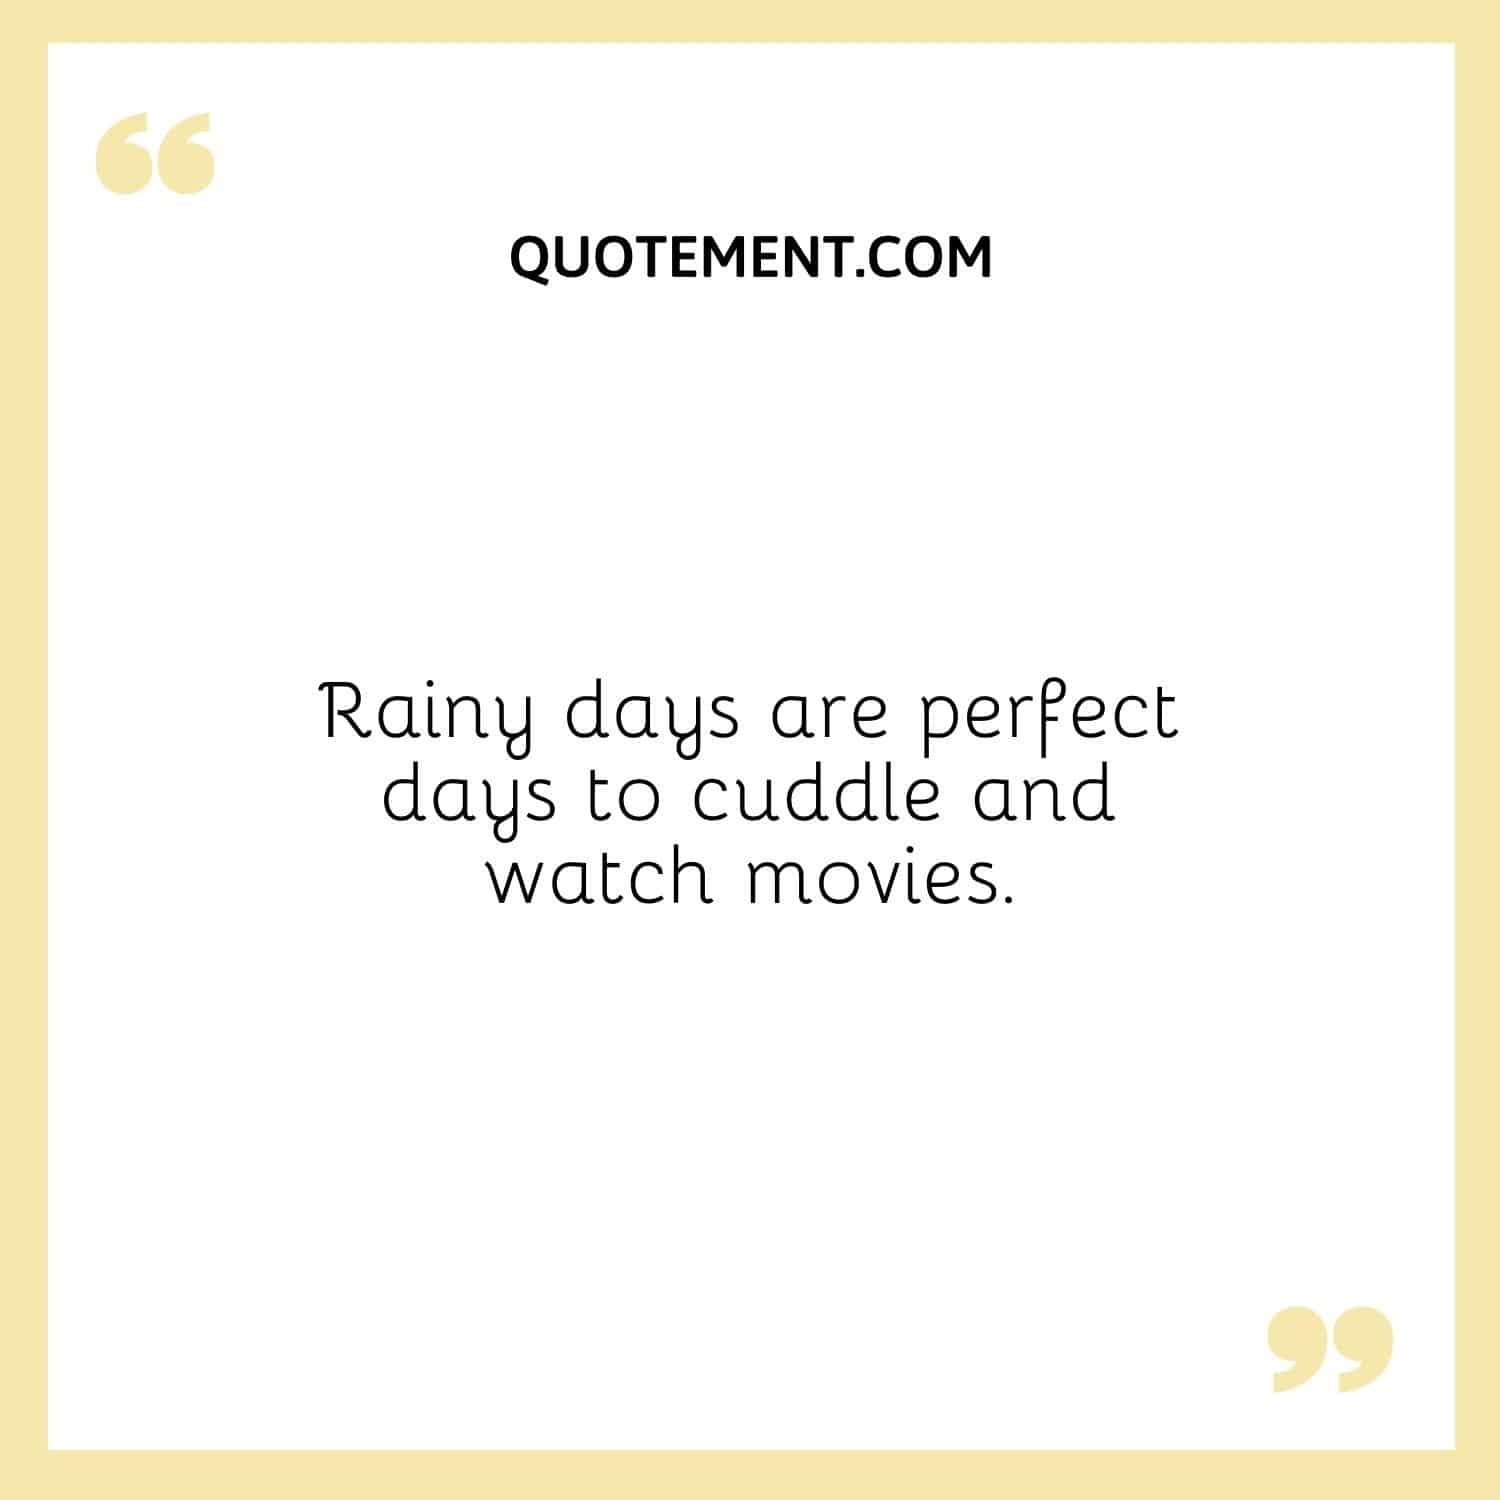 Rainy days are perfect days to cuddle and watch movies.